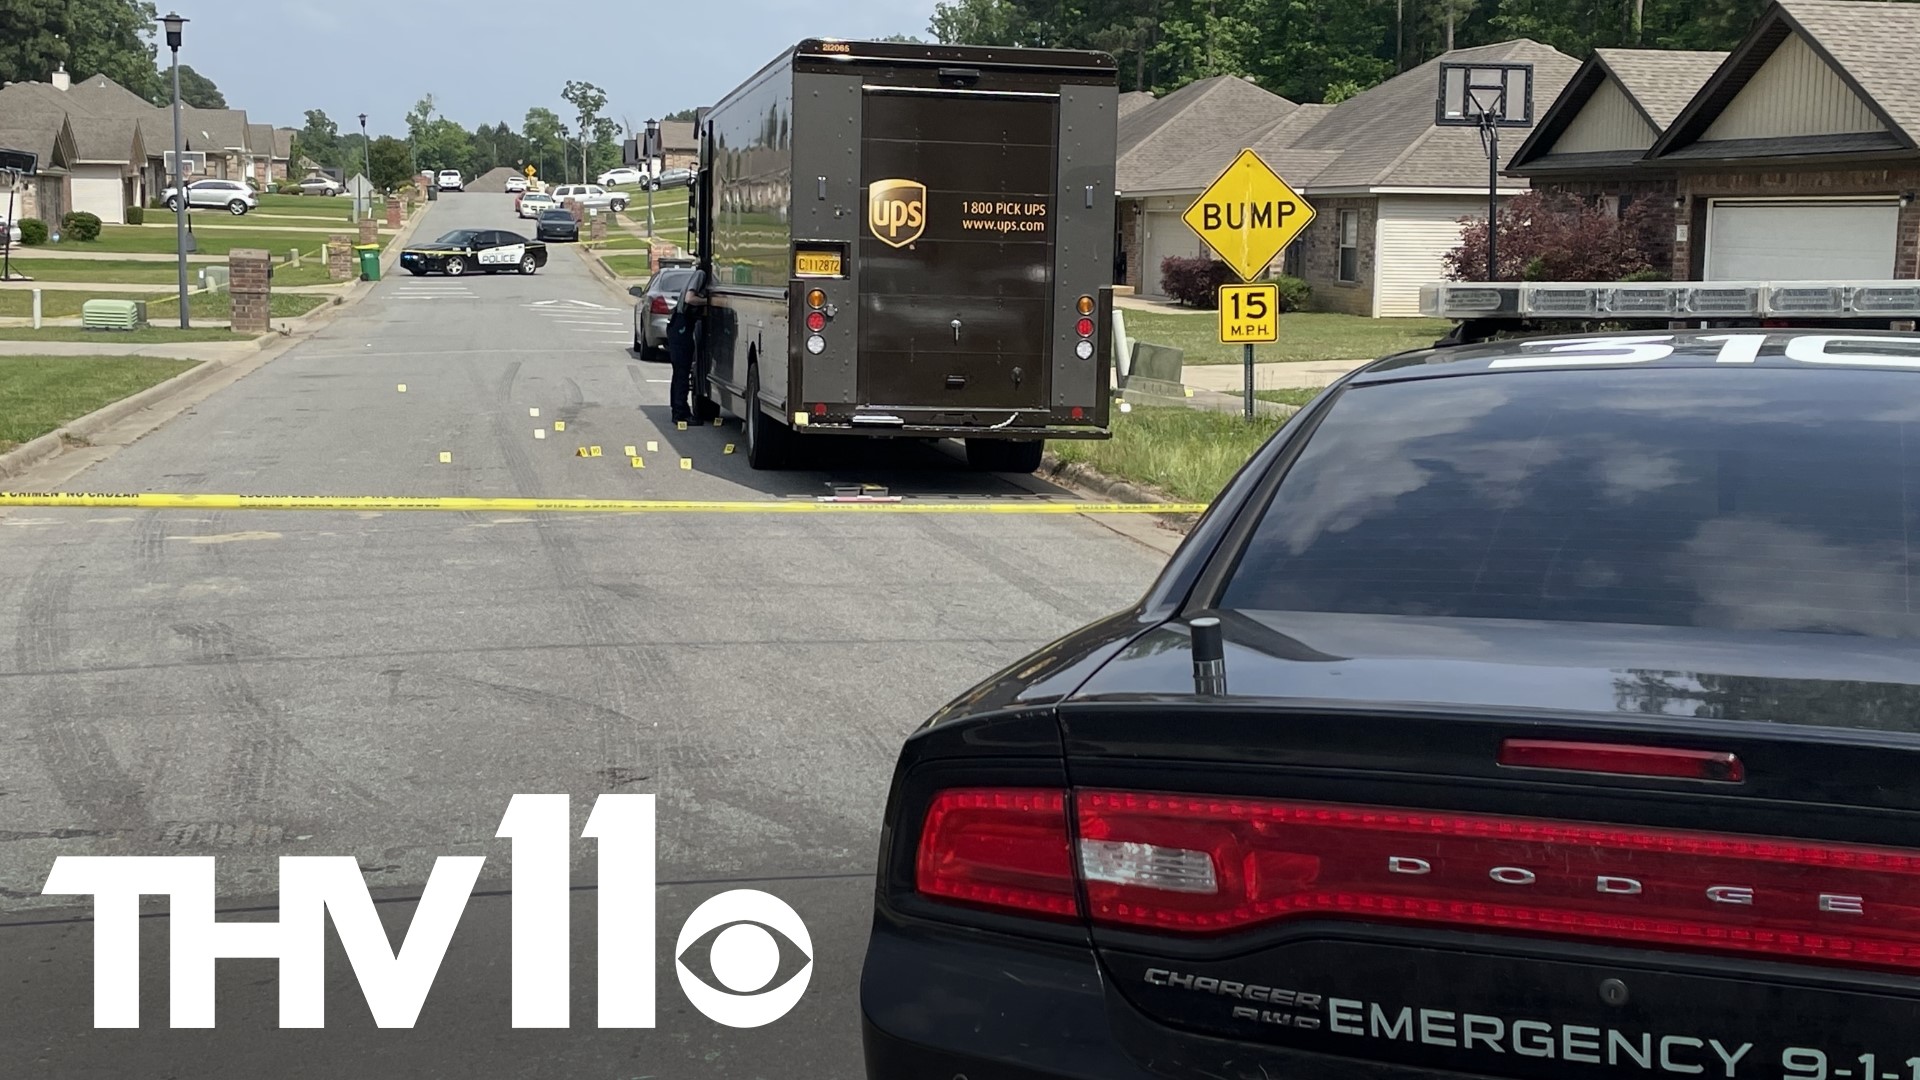 Police in Little Rock are investigating a shooting that left a UPS driver in critical condition on Wednesday afternoon.